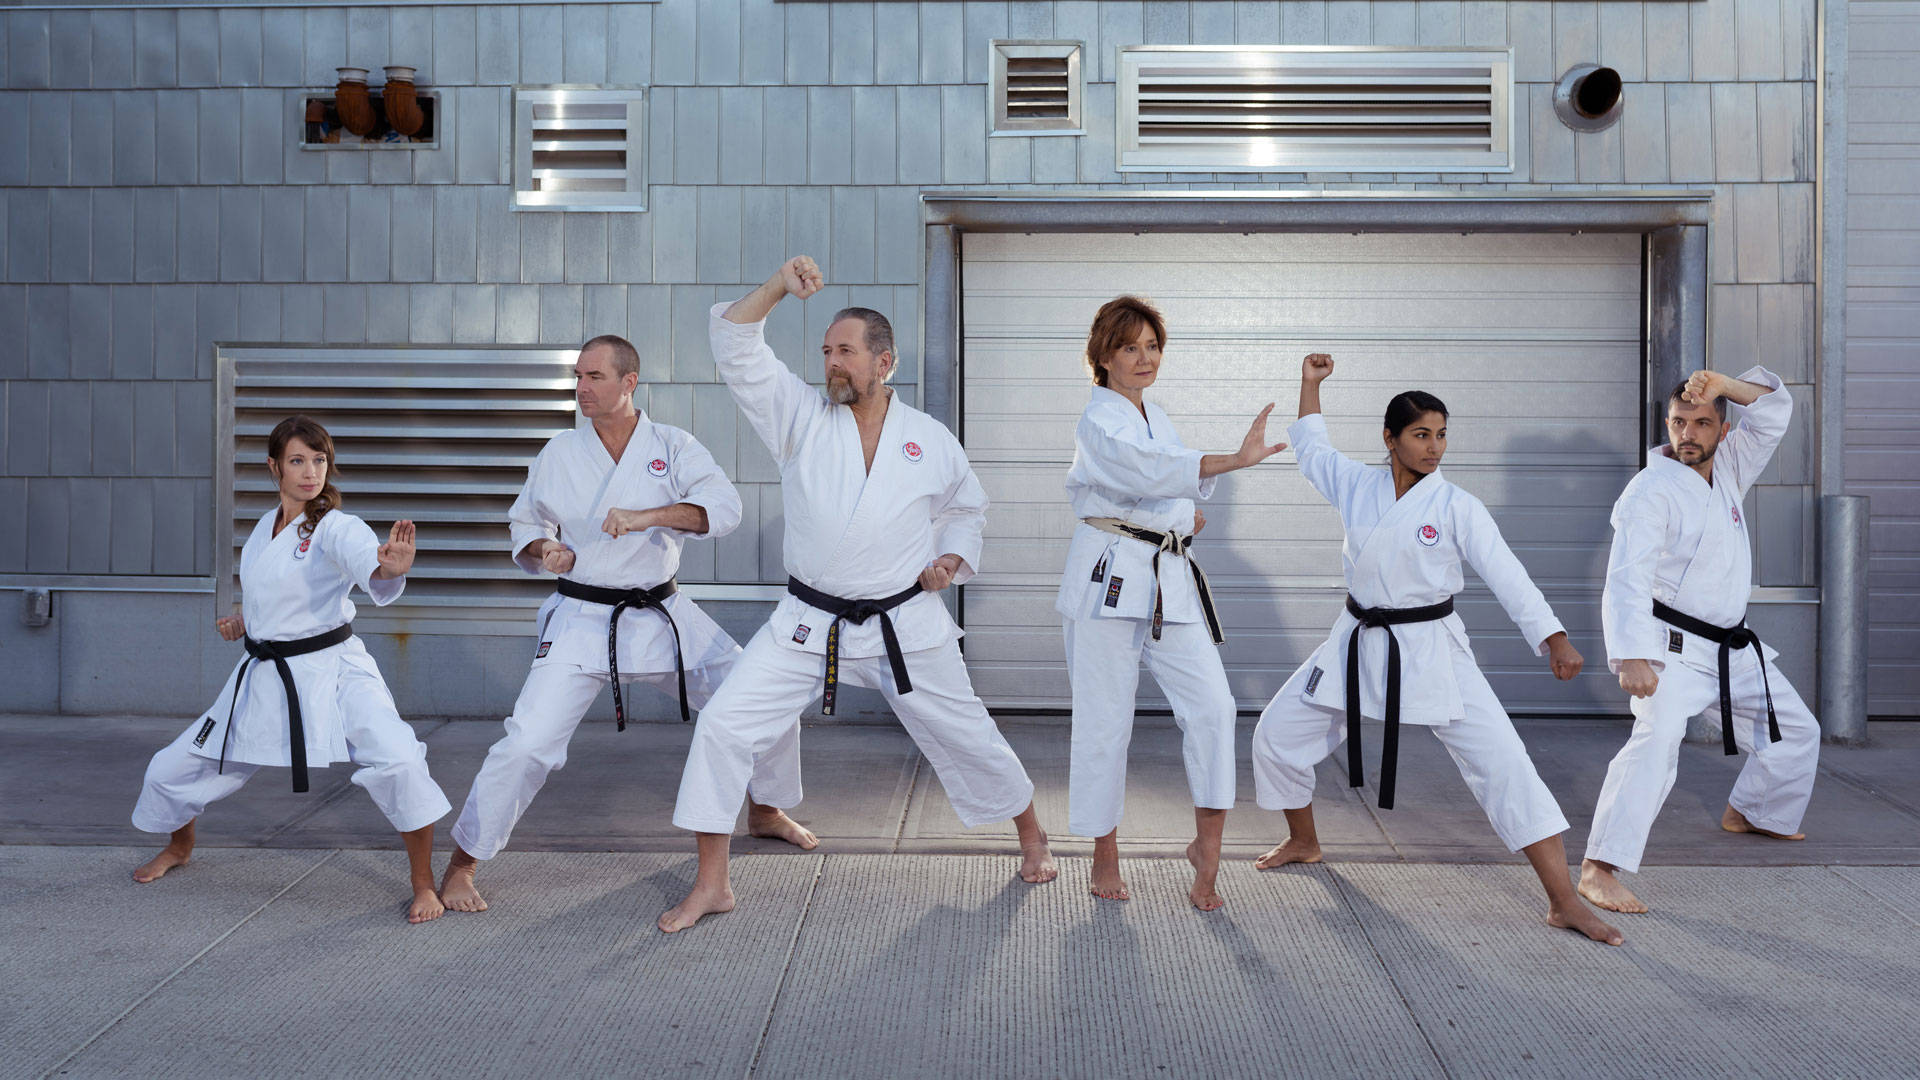 Karate Masters in Action Wallpaper